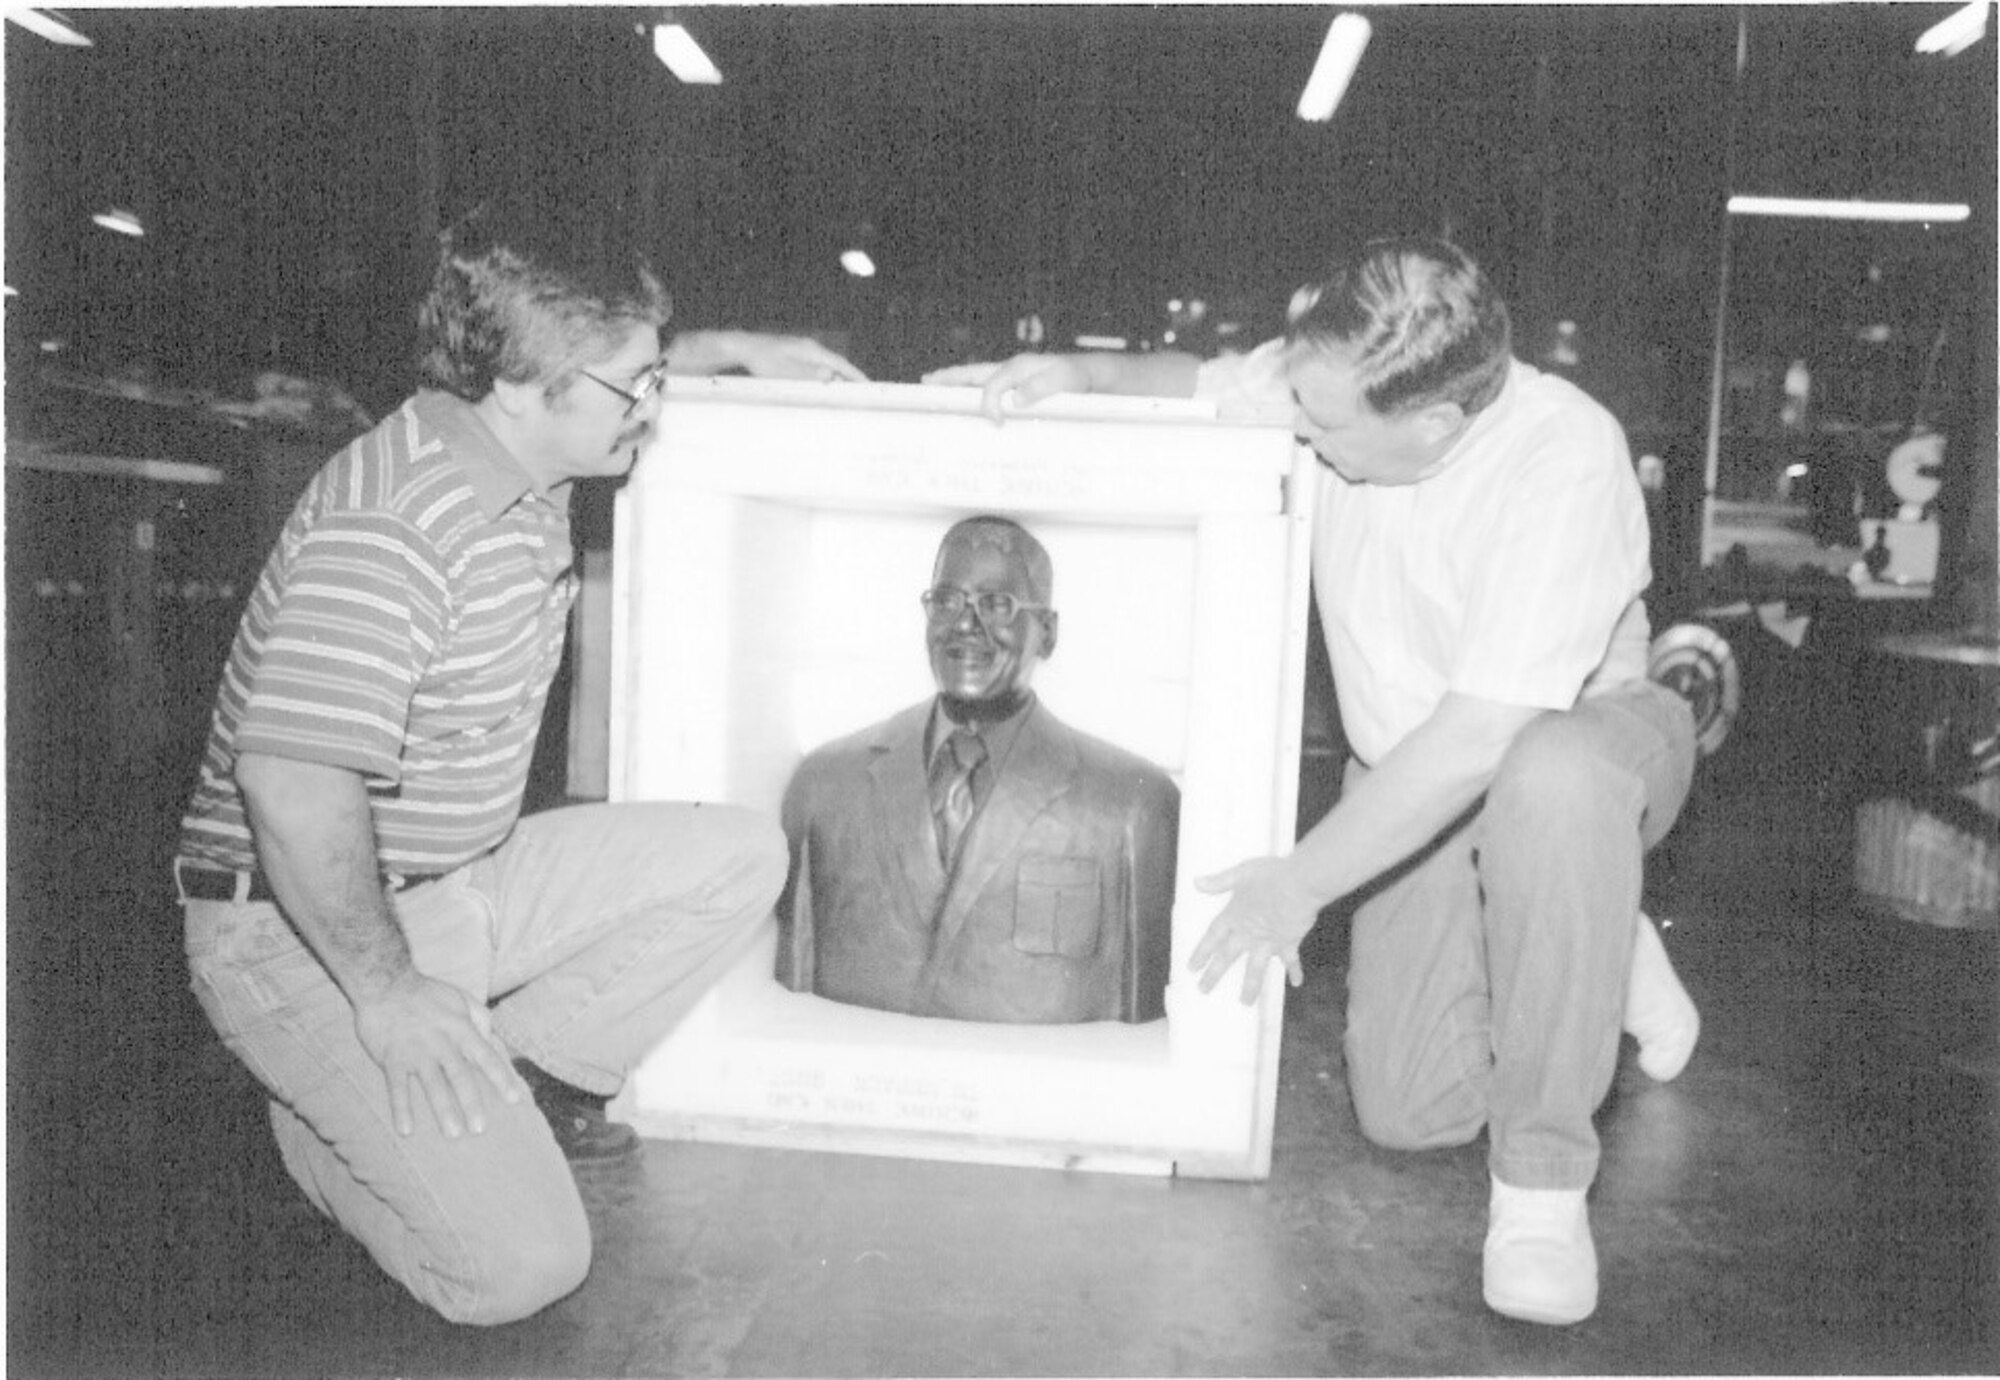 Photo of Wilber Miller’s bust, sculpted by Emilio Torres, being unpacked before placement at the Kelly Veteran’s Memorial Park, “Ring of Honor” at Kelly Air Force Base, which is now Port San Antonio. (Courtesy photo)